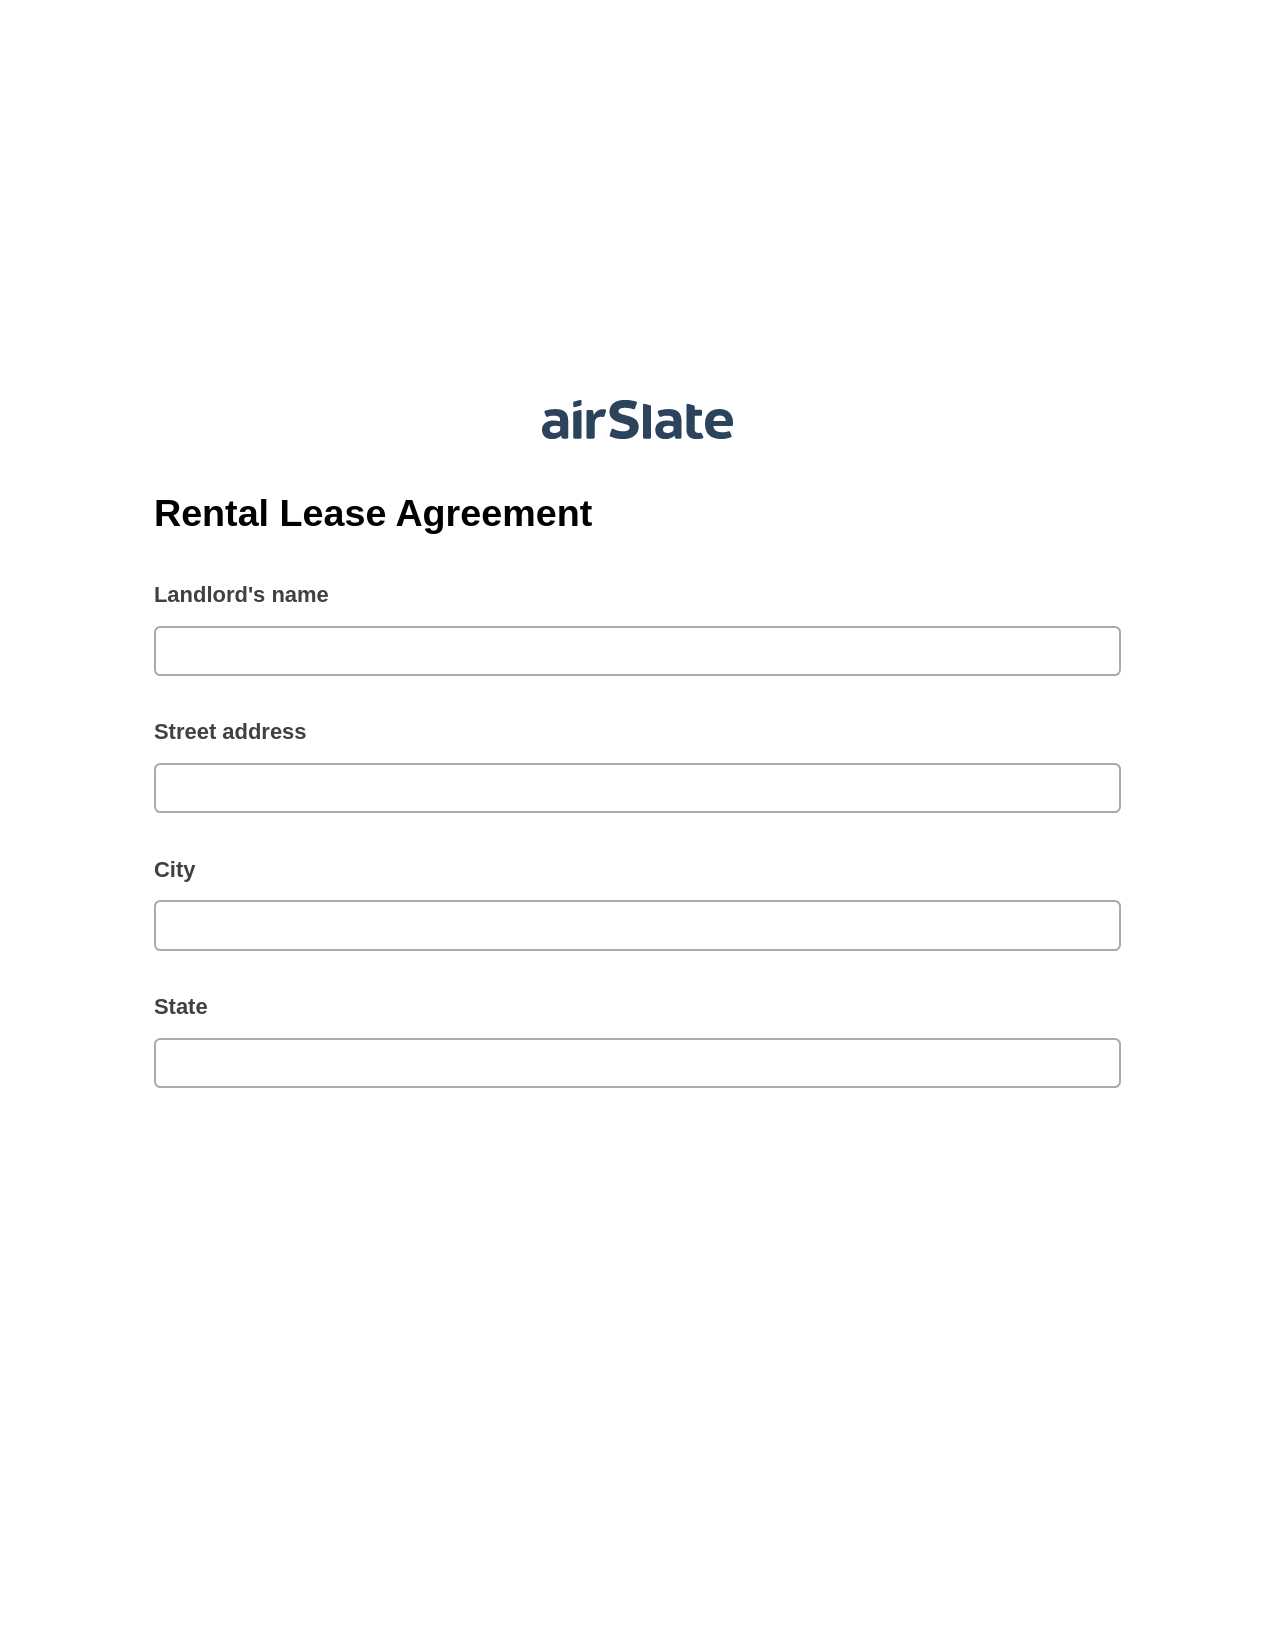 Rental Lease Agreement Pre-fill from MySQL Dropdown Options Bot, Create Slate every Google Sheet Update Bot, Export to Smartsheet